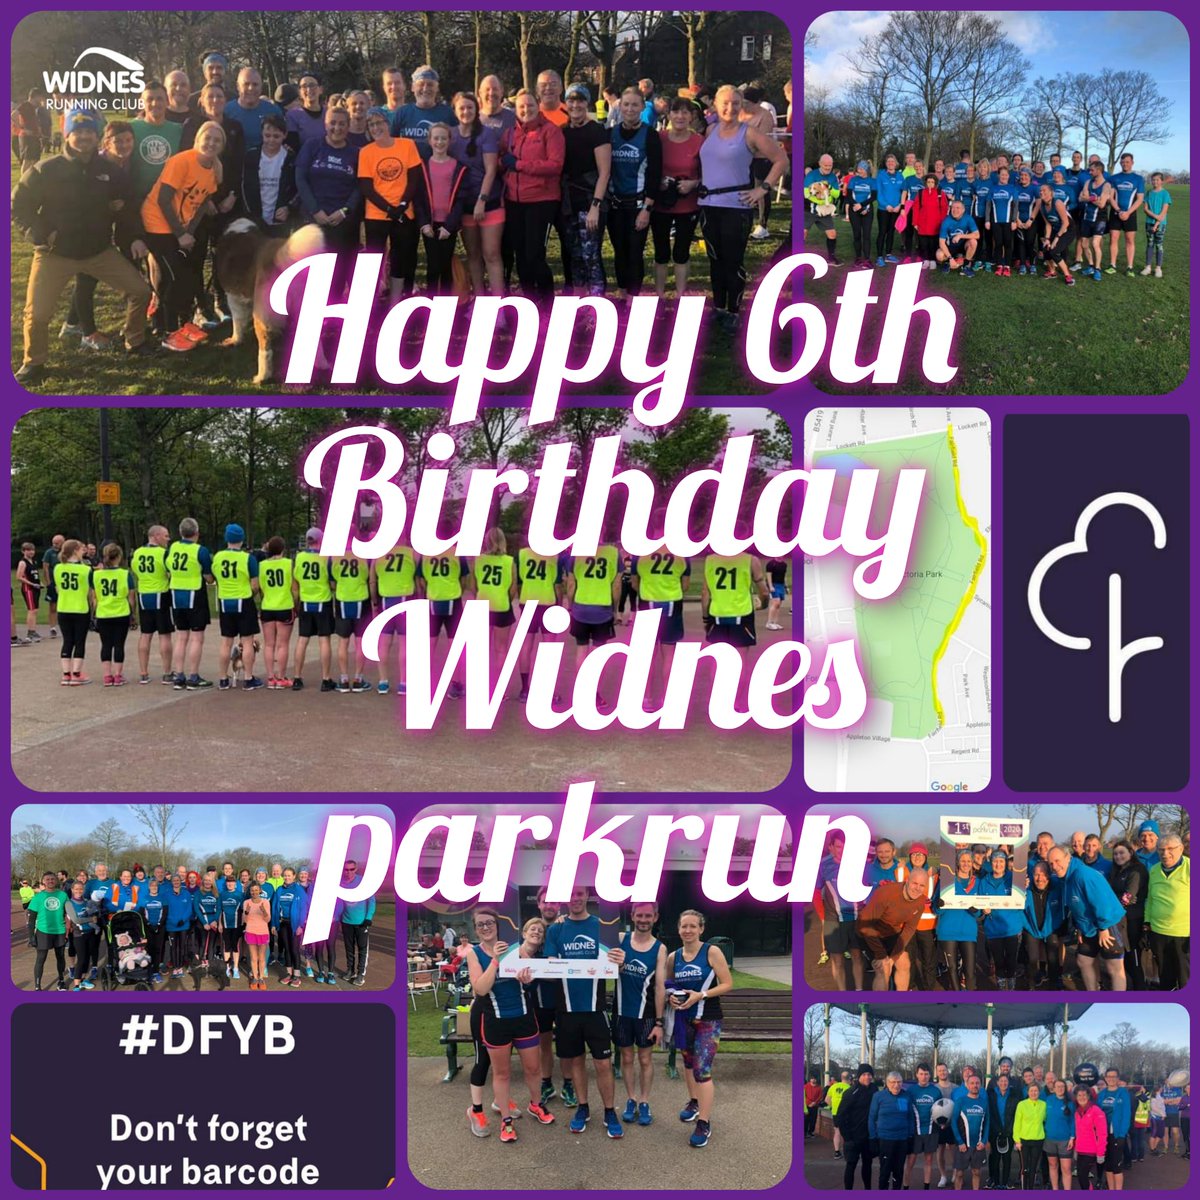 Happy birthday to @widnesparkrun who turn 6 this weekend! We're sorry we can't celebrate it with you as we'd like, like you we can't wait until parkrun returns! See you on that start line soon guys 🙂 #widnesrunningclub #widnes #halton #widnesparkrun #loveparkrun #parkrunuk